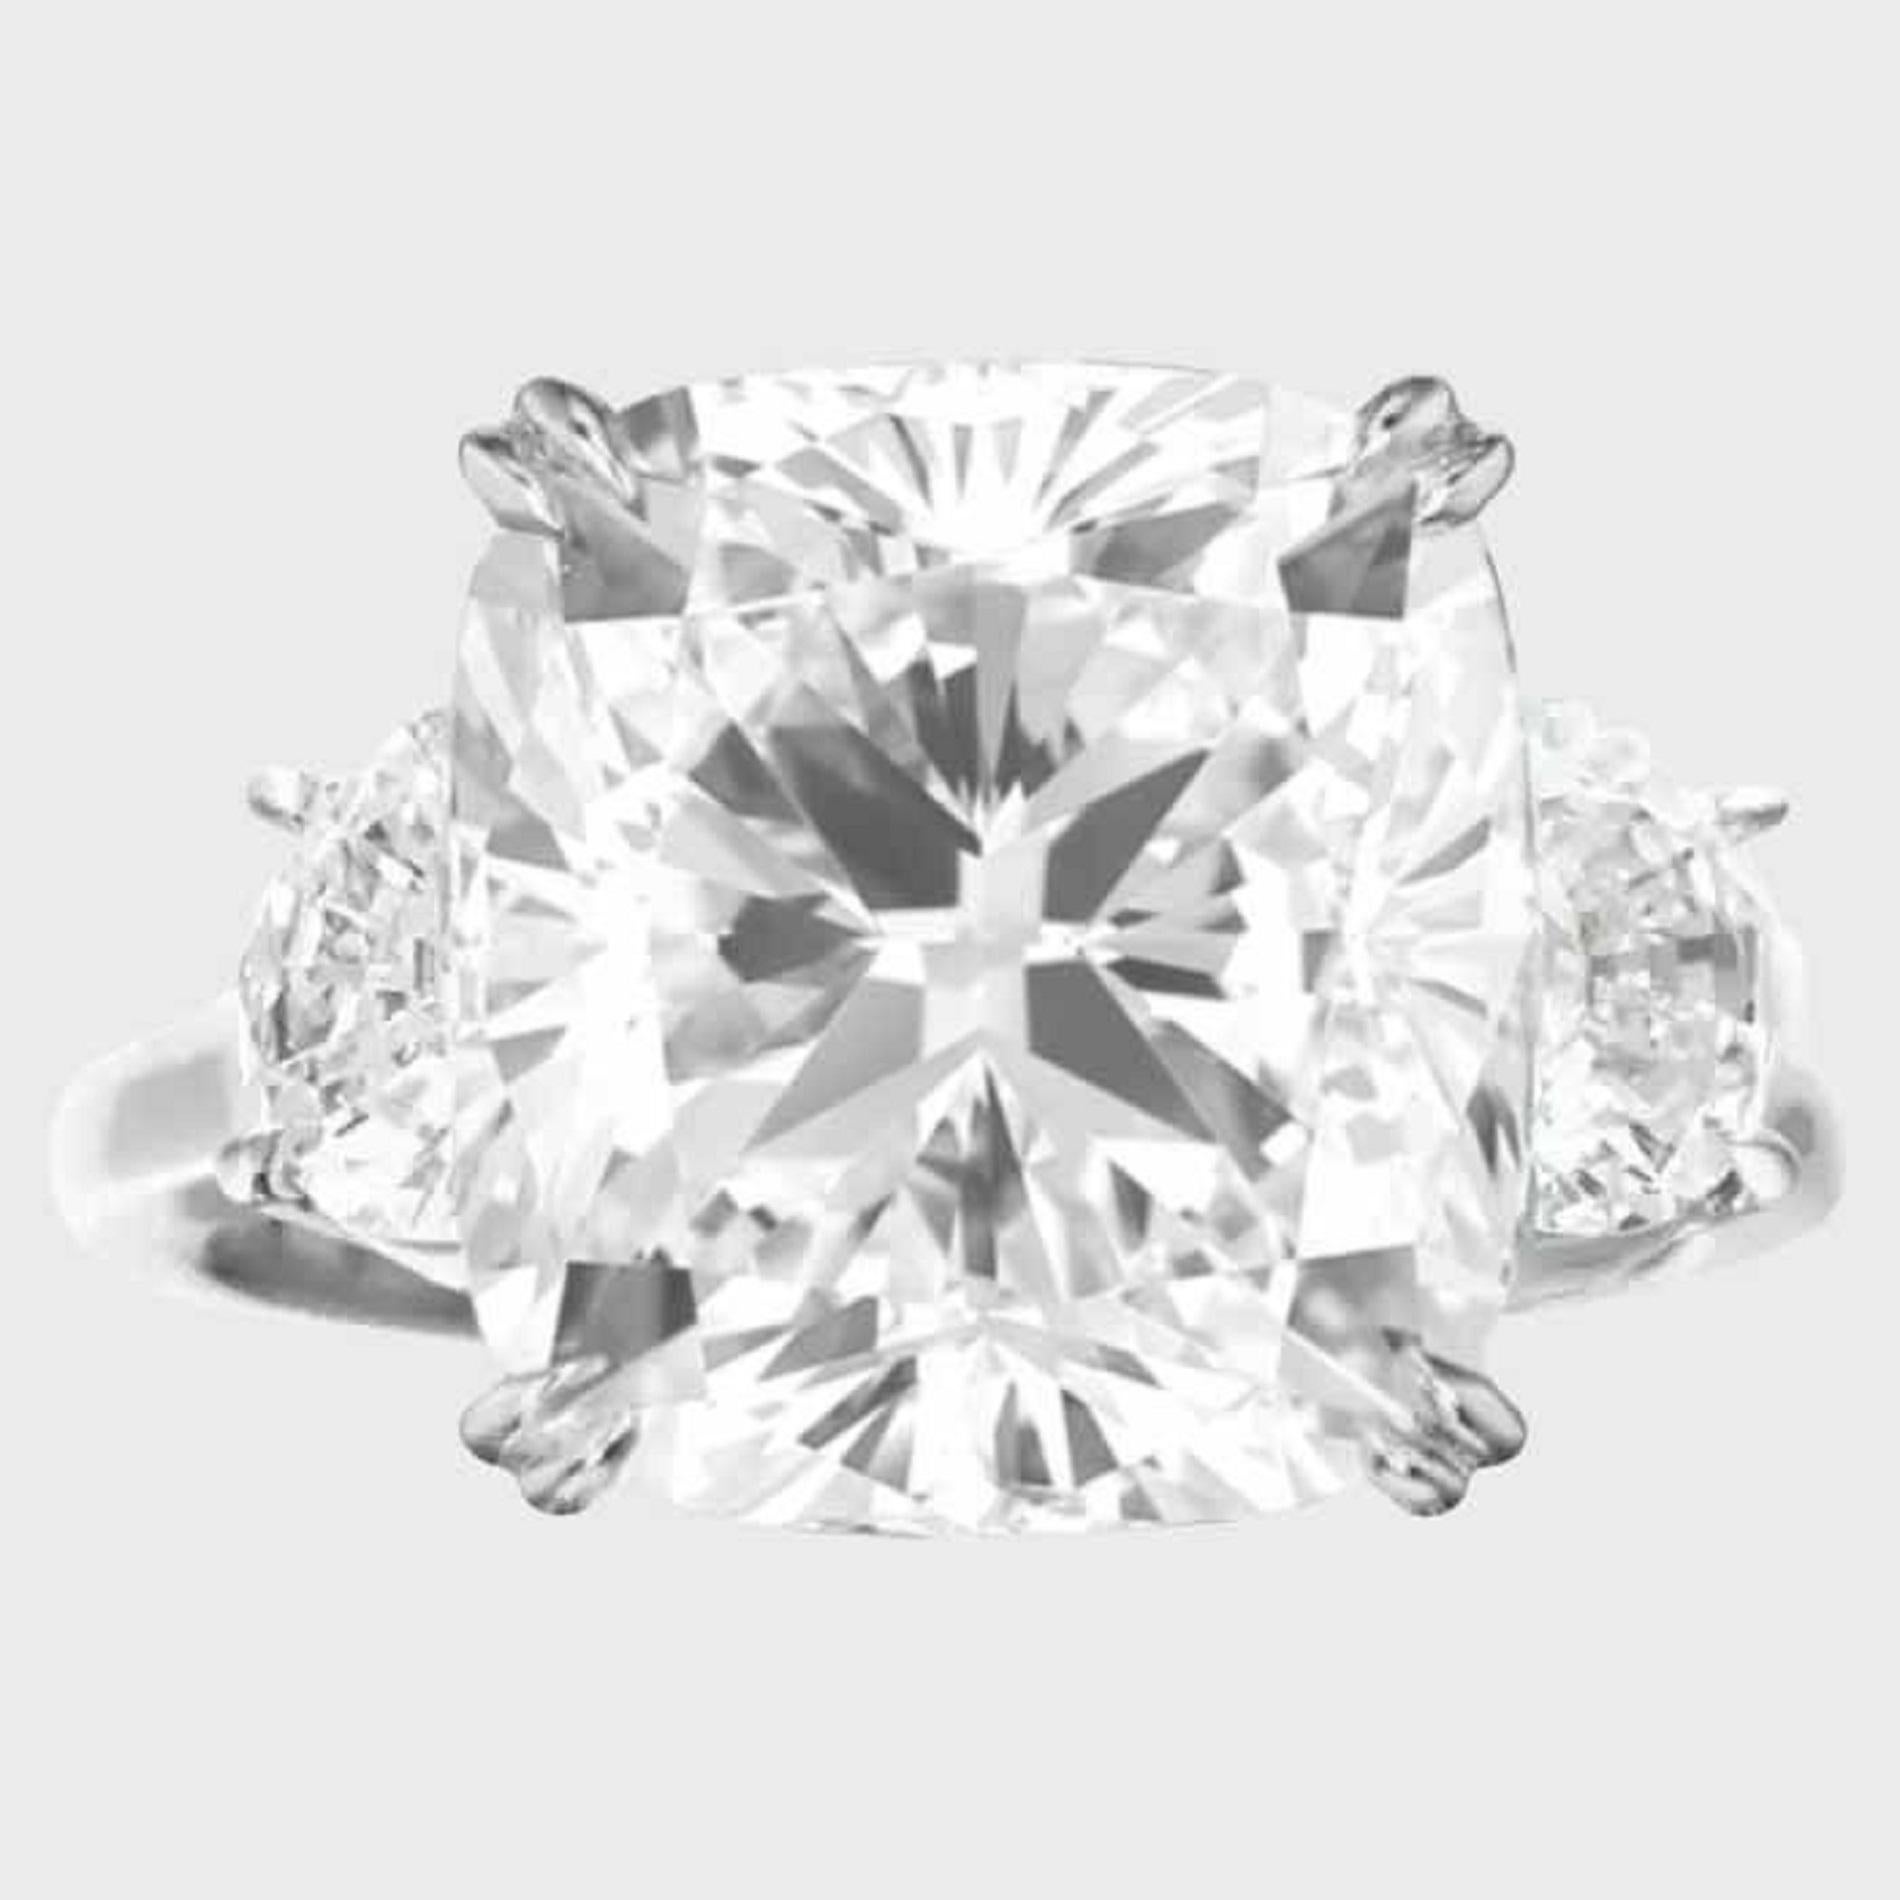 Forged in the refinement of solid platinum, this ring is a marvel of jewelry artistry featuring a resplendent 8 carat cushion cut diamond. 

With the Gemological Institute of America's certification, the diamond is distinguished by a F color rating,